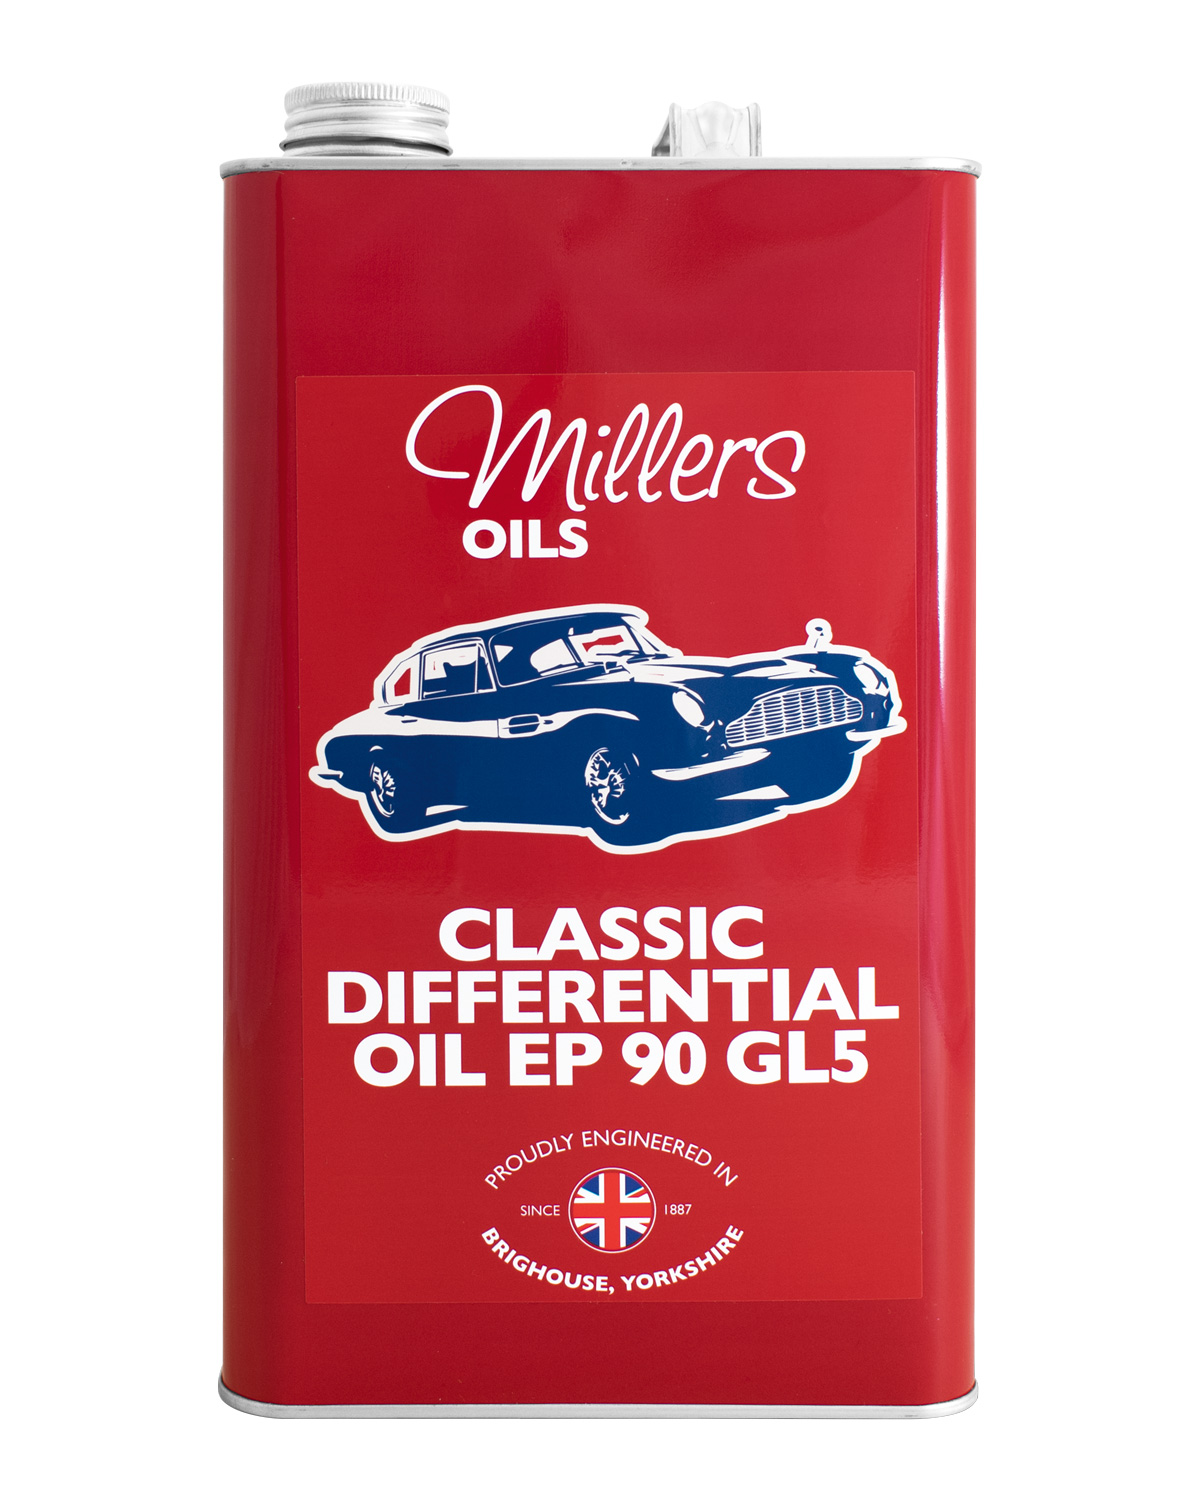 Millers Oils Classic Differential Oil EP 90 GL5, 5 Liter